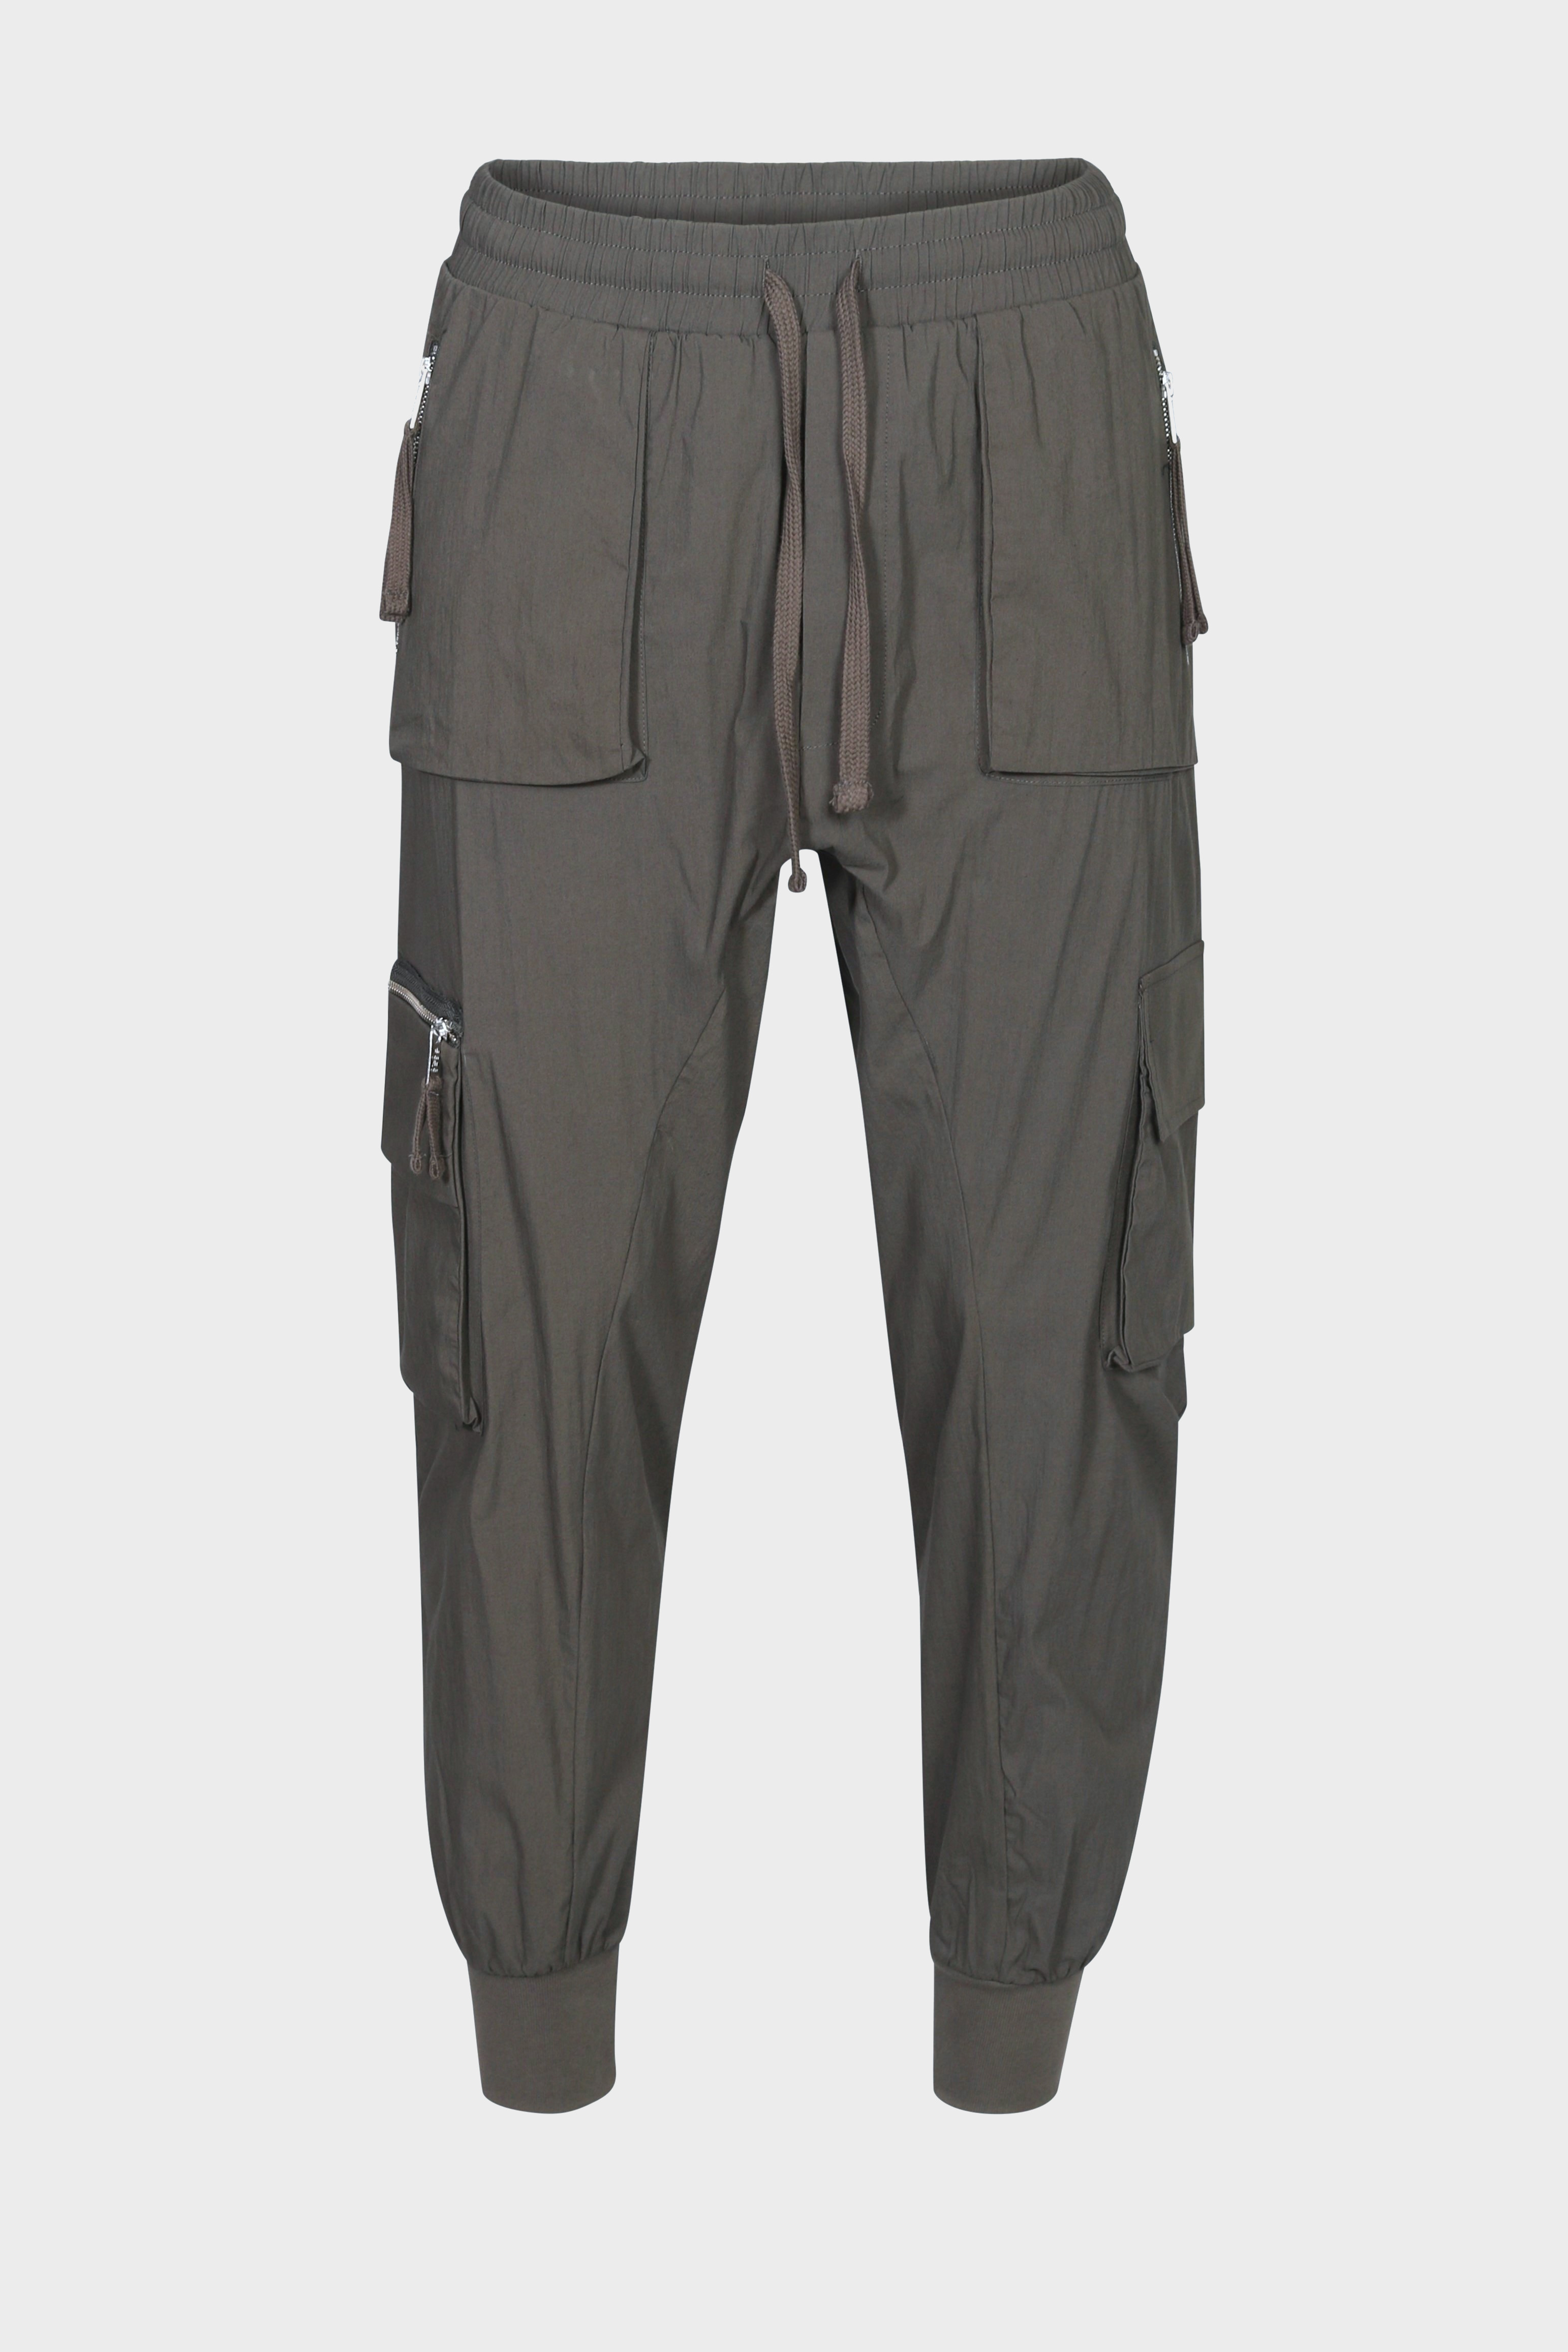 THOM KROM Cargo Pant in Ivy Green